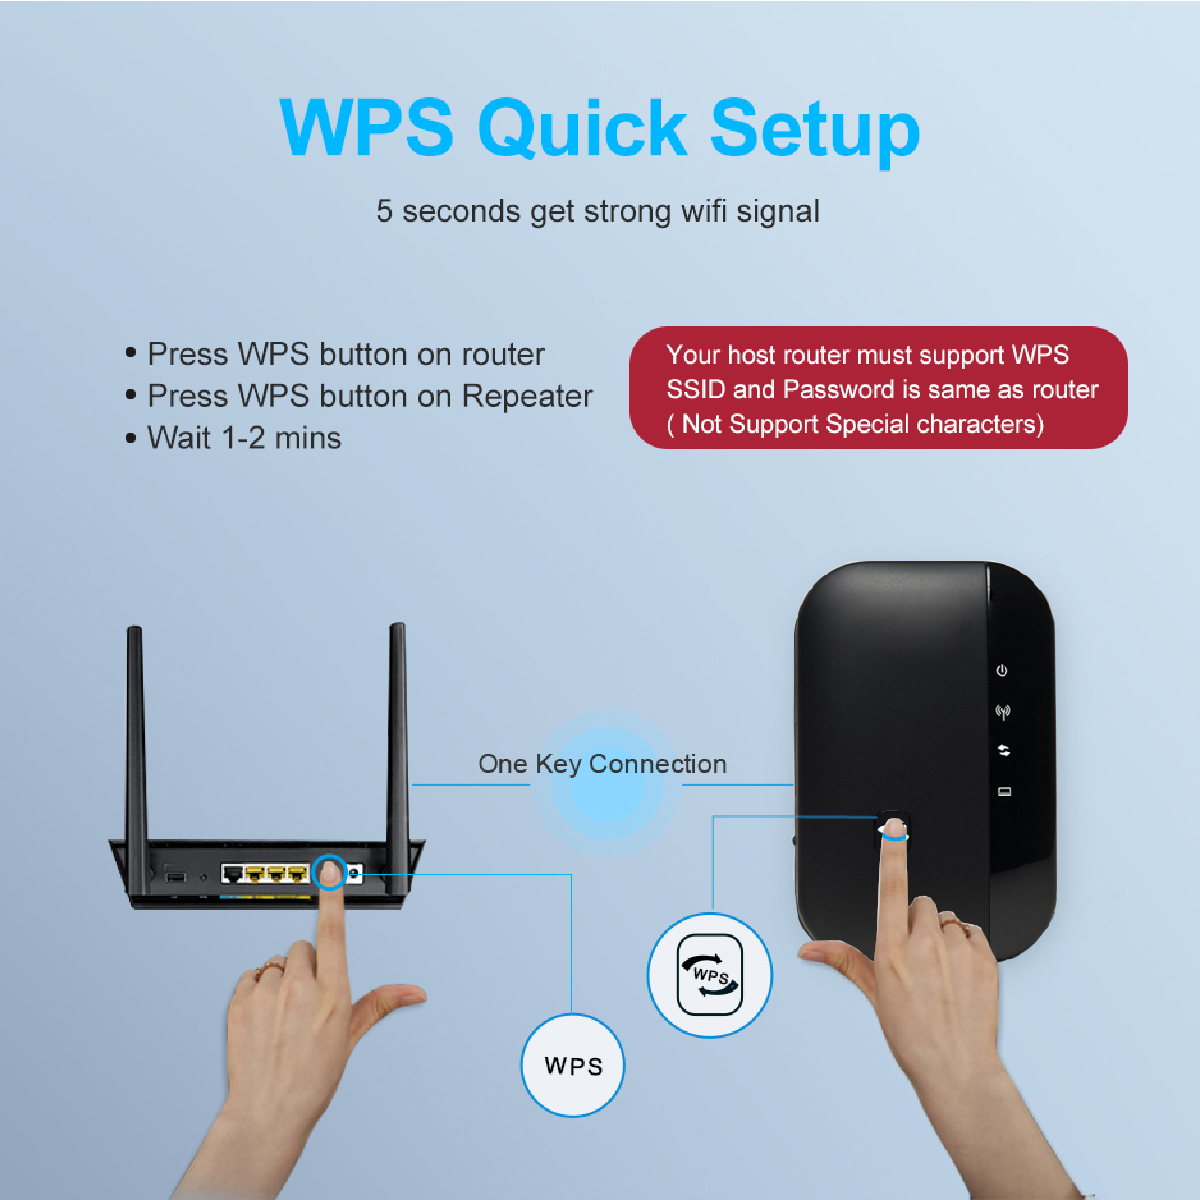 Ge01-Wireless-network-signal-repeater-wifi-small-amplifier-router-head-expander-300M-enhanced-transm-1553783-6